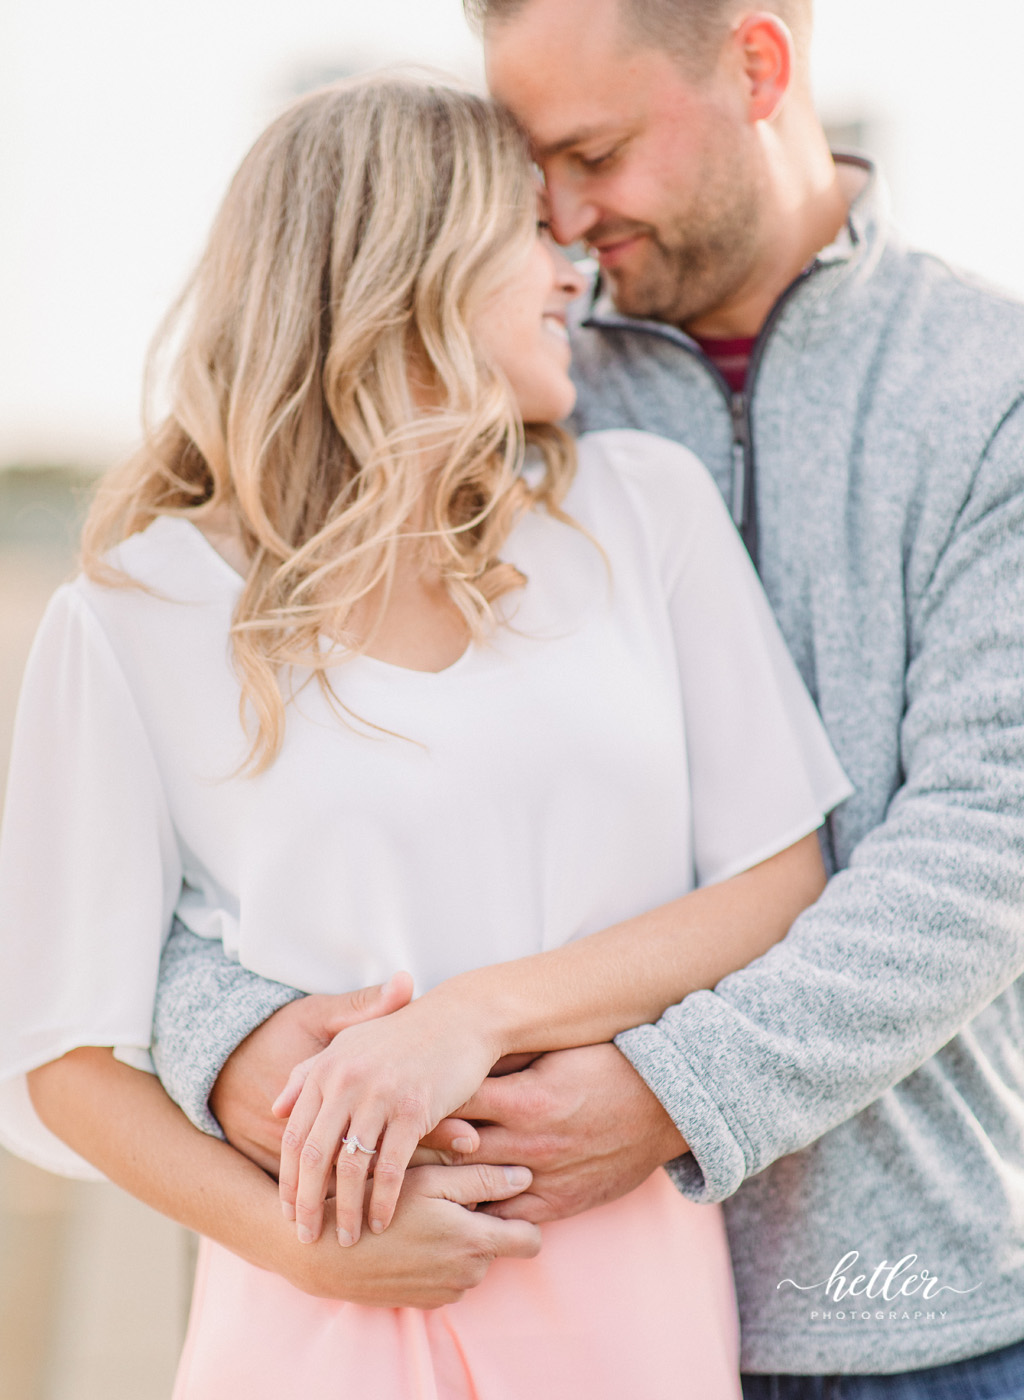 Kalamazoo engagement photos in downtown Kalamazoo and in the country during golden hour